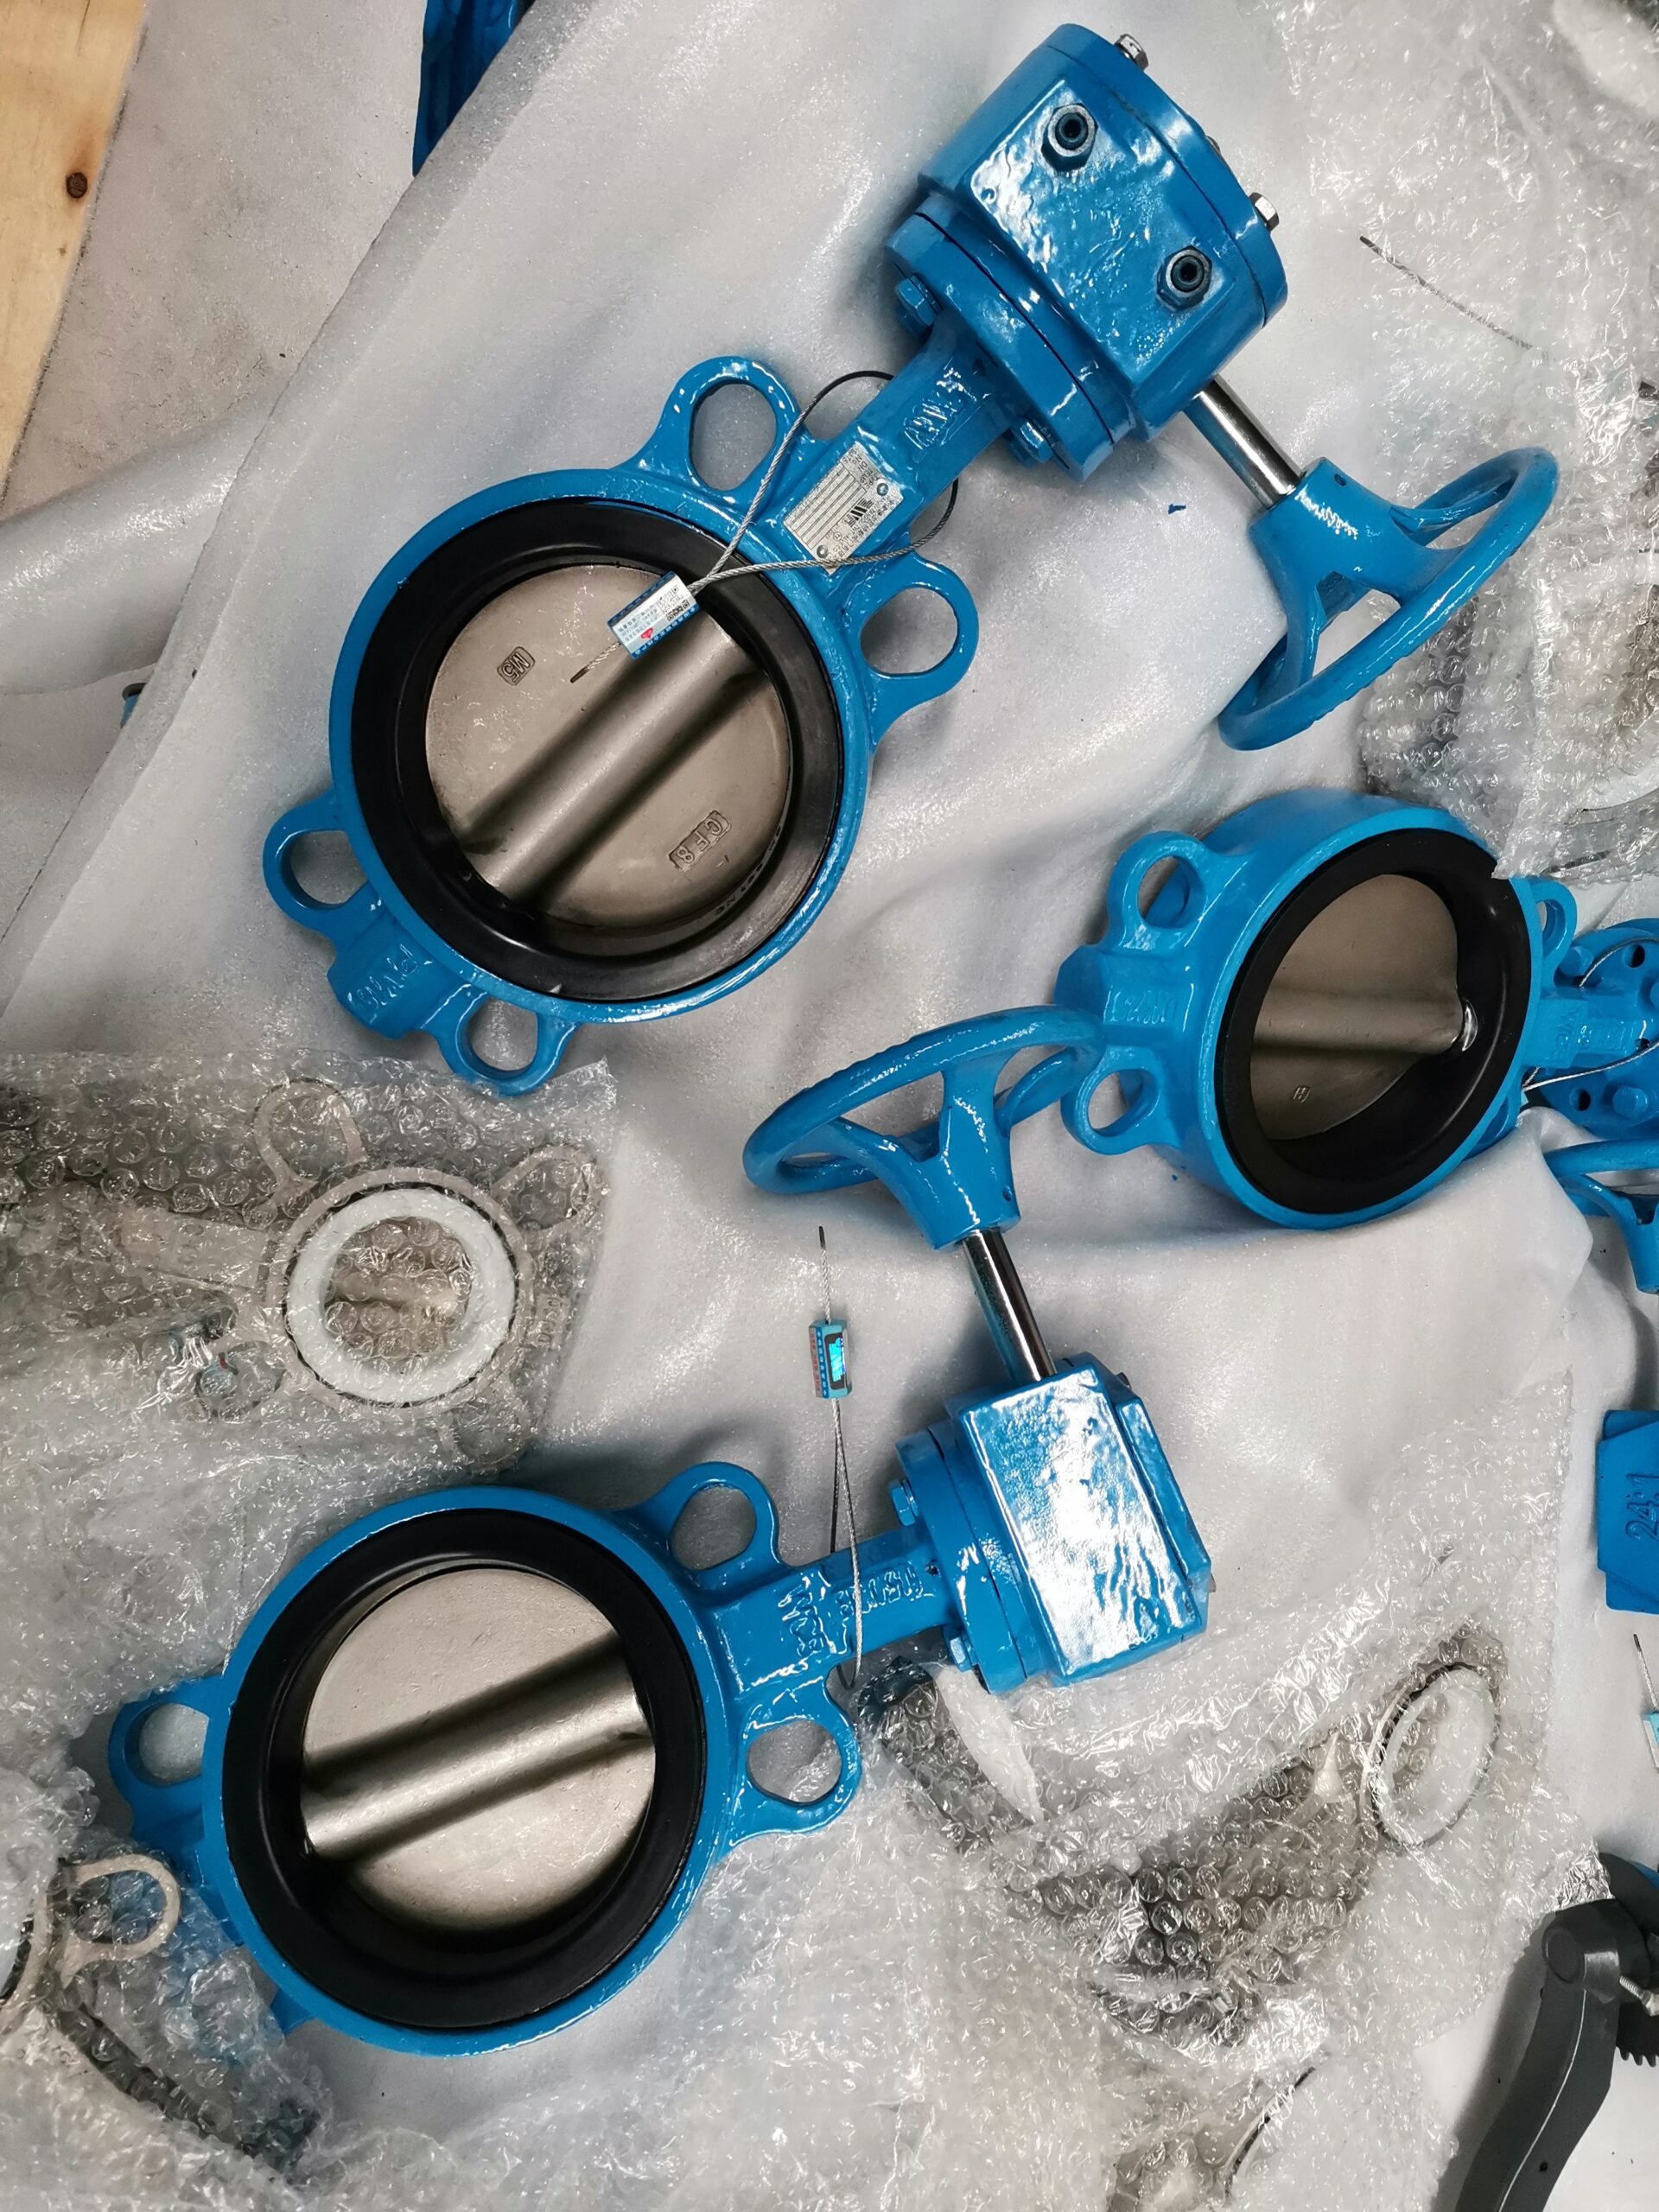 1 inch butterfly valves